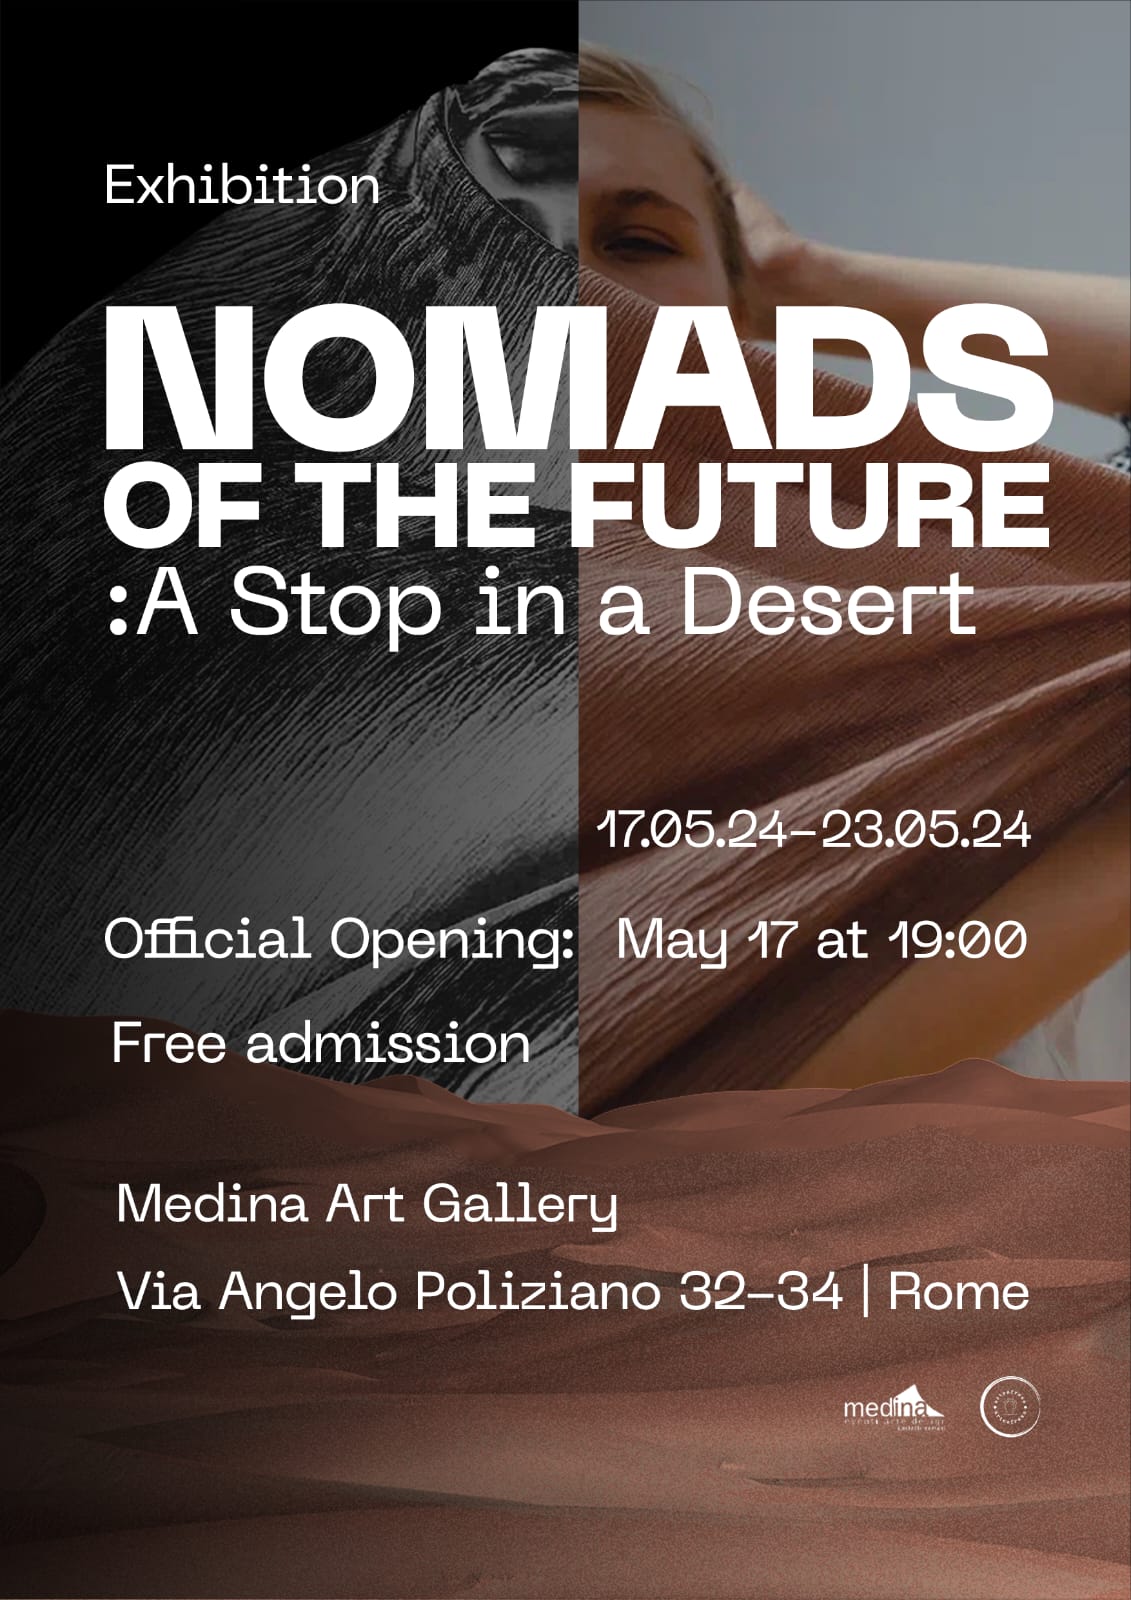 INTERNATIONAL EXHIBITION NOMADS OF THE FUTURE: A Stop in the Desert